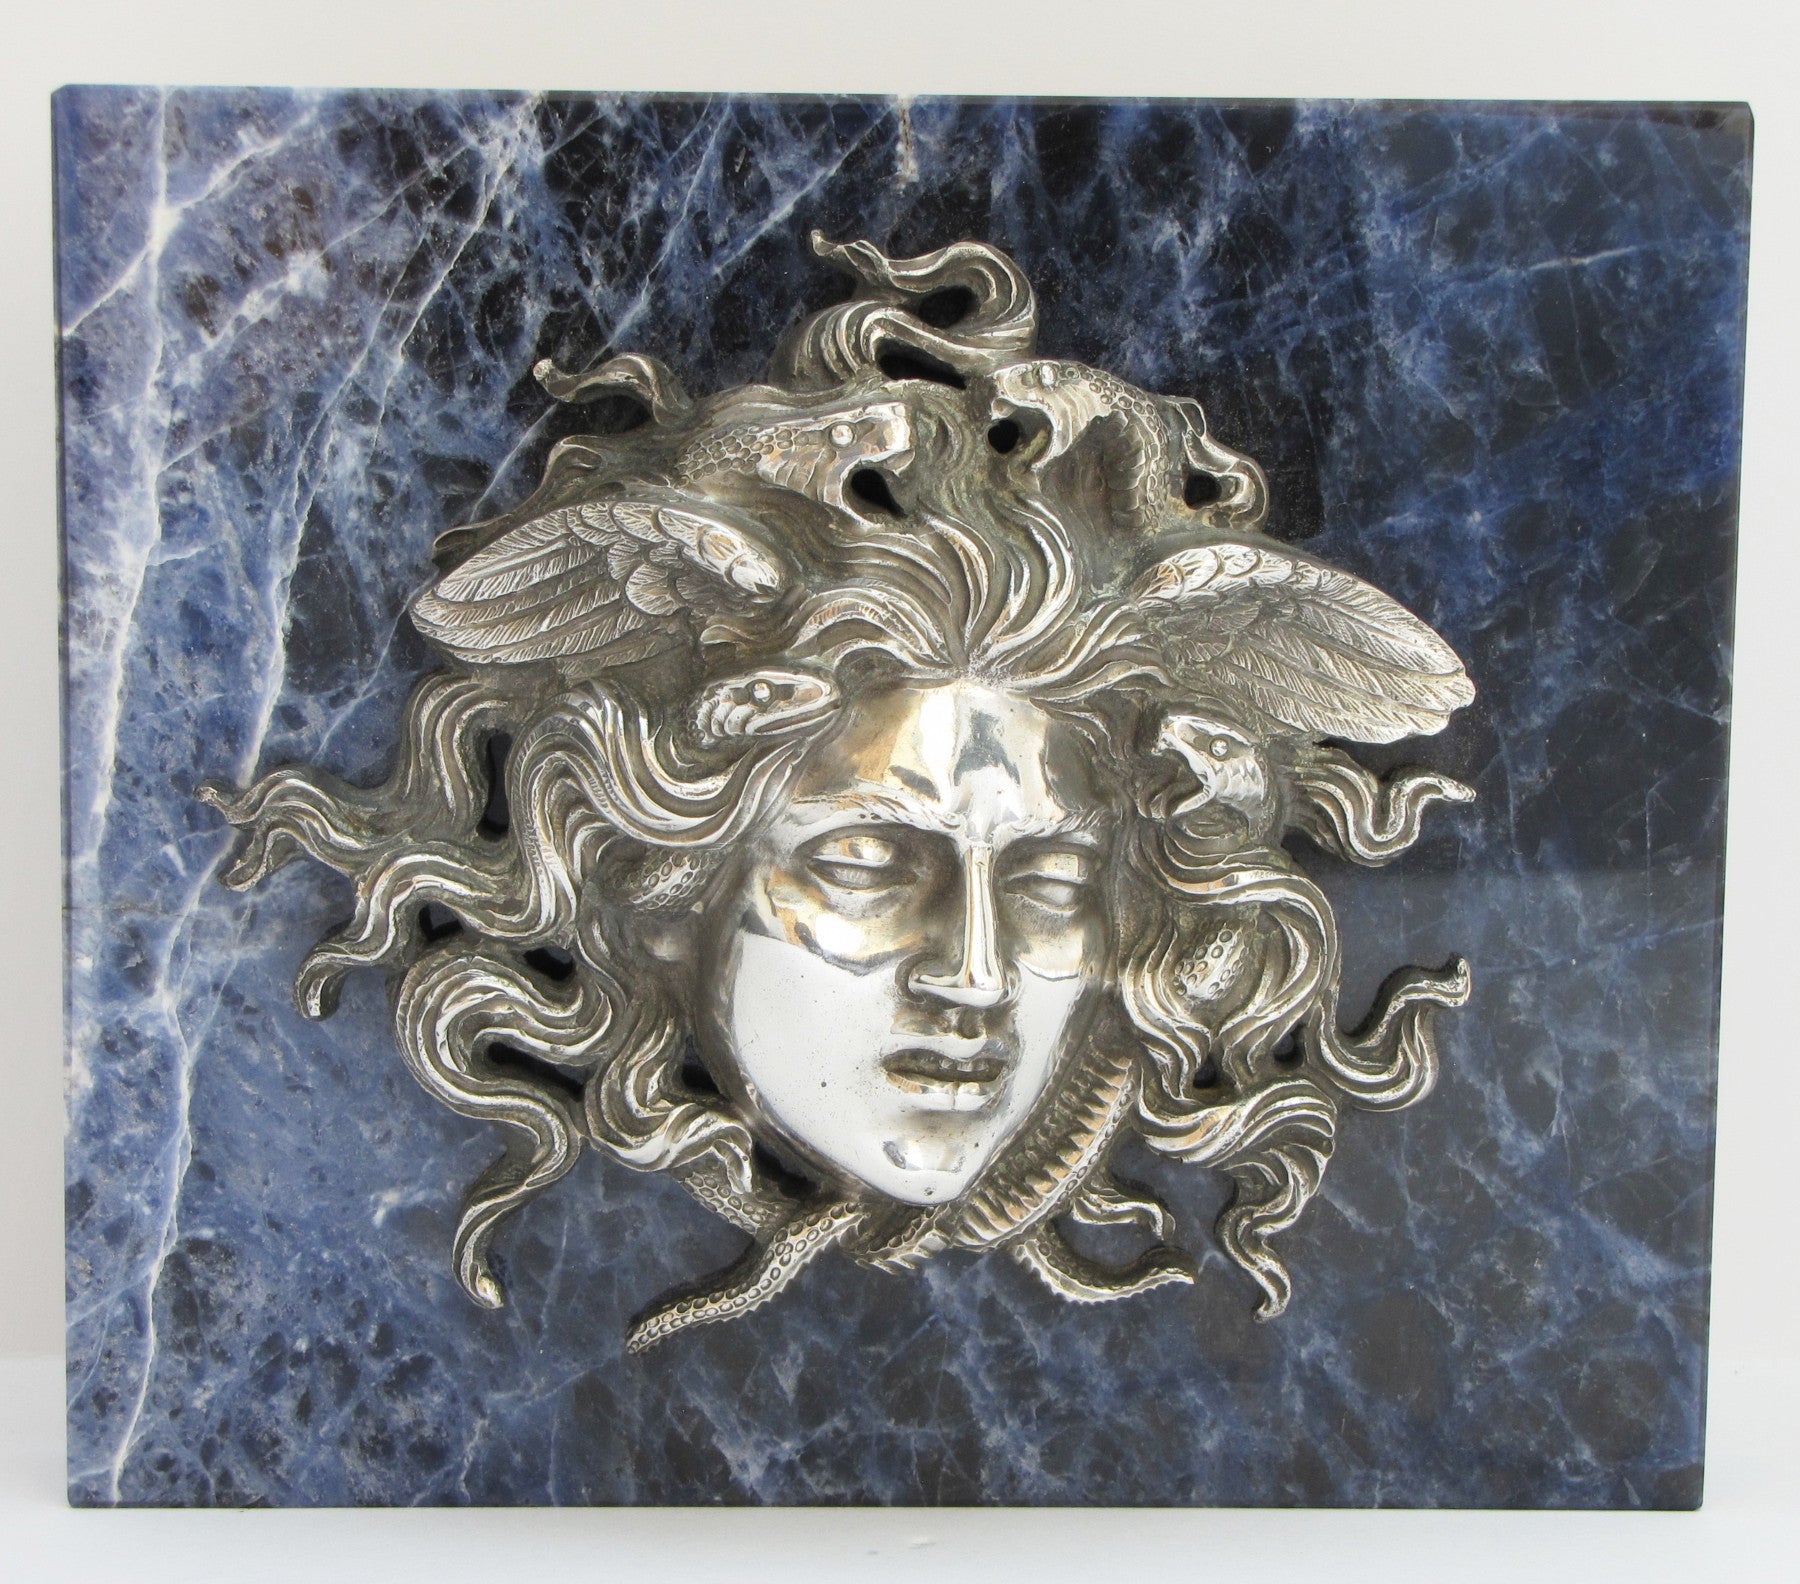 medusa head paperweight, large, 800/1000 silver, weight about 896 g. (31,60 oz), size 110x130x38 mm